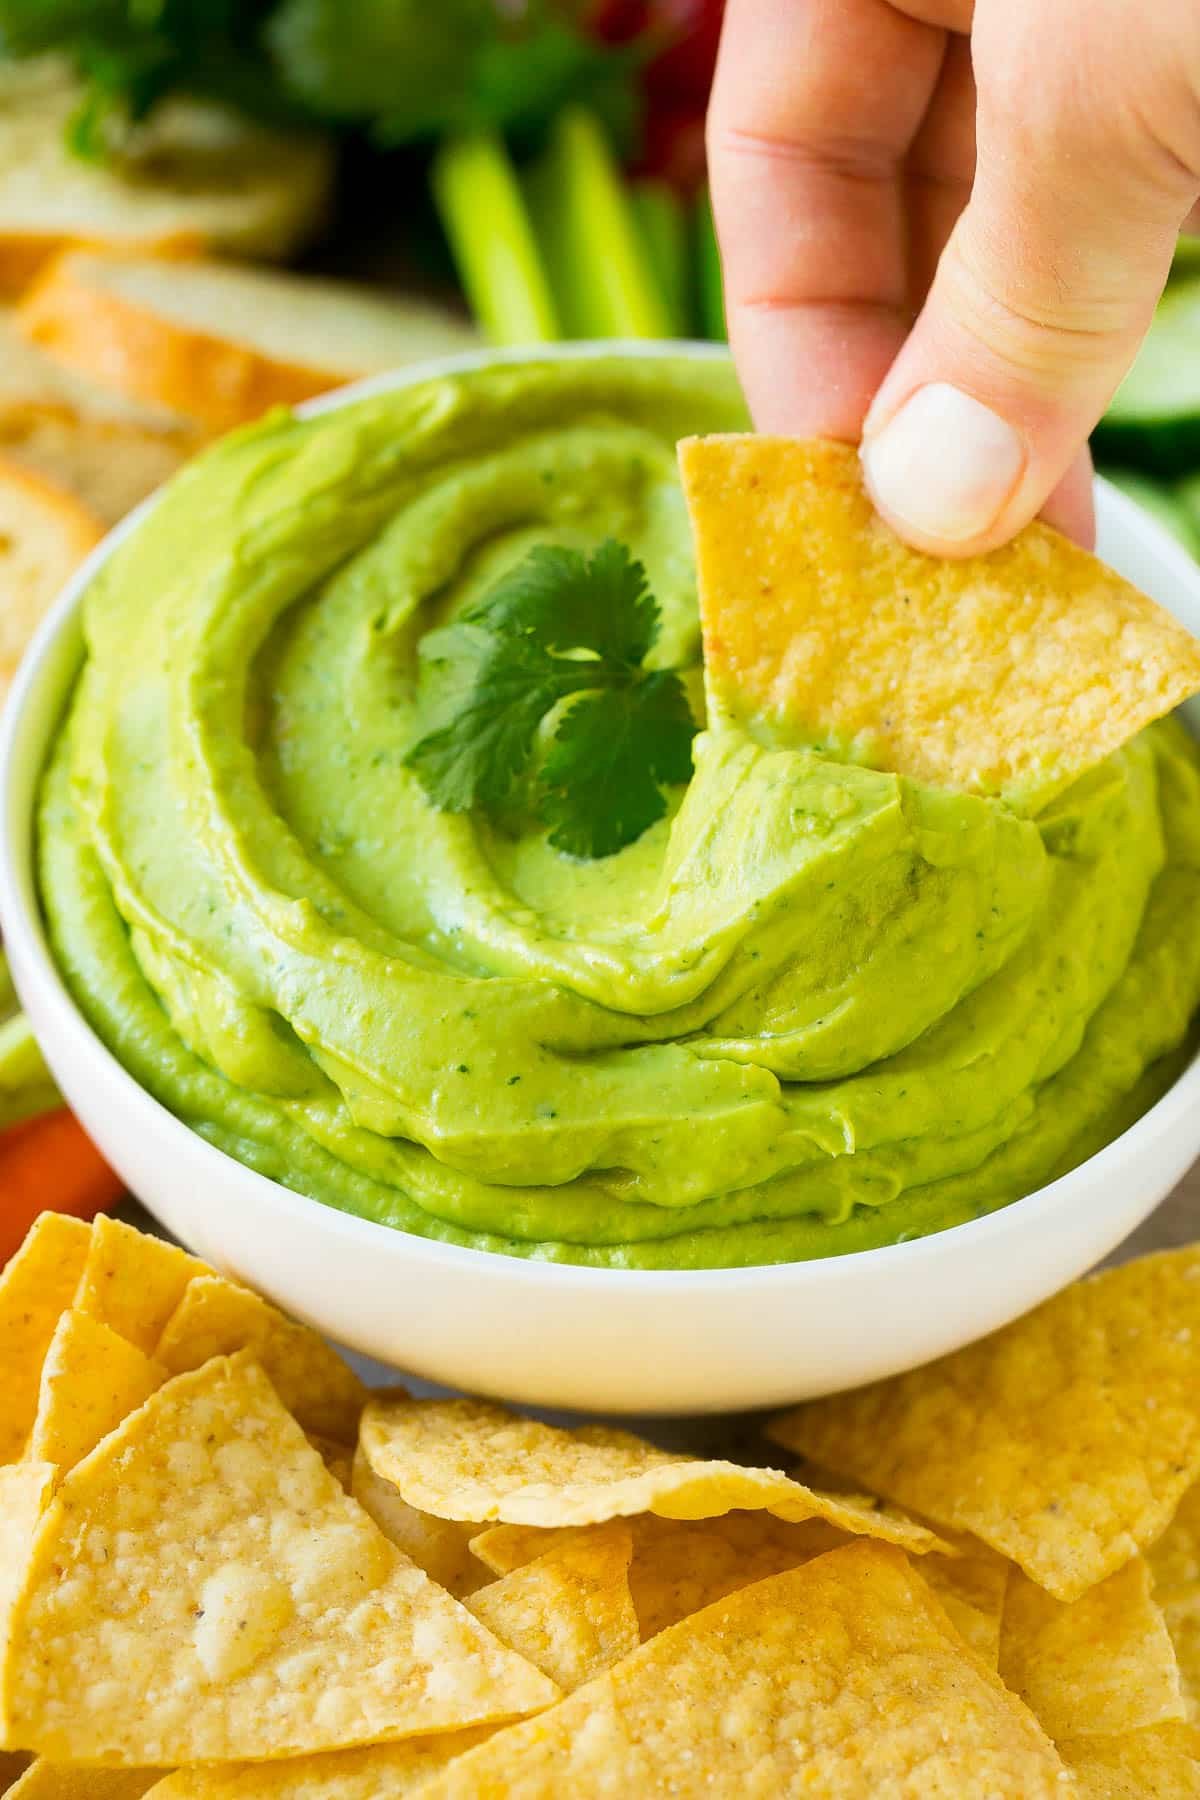 A tortilla chip scooping up a serving of avocado dip.